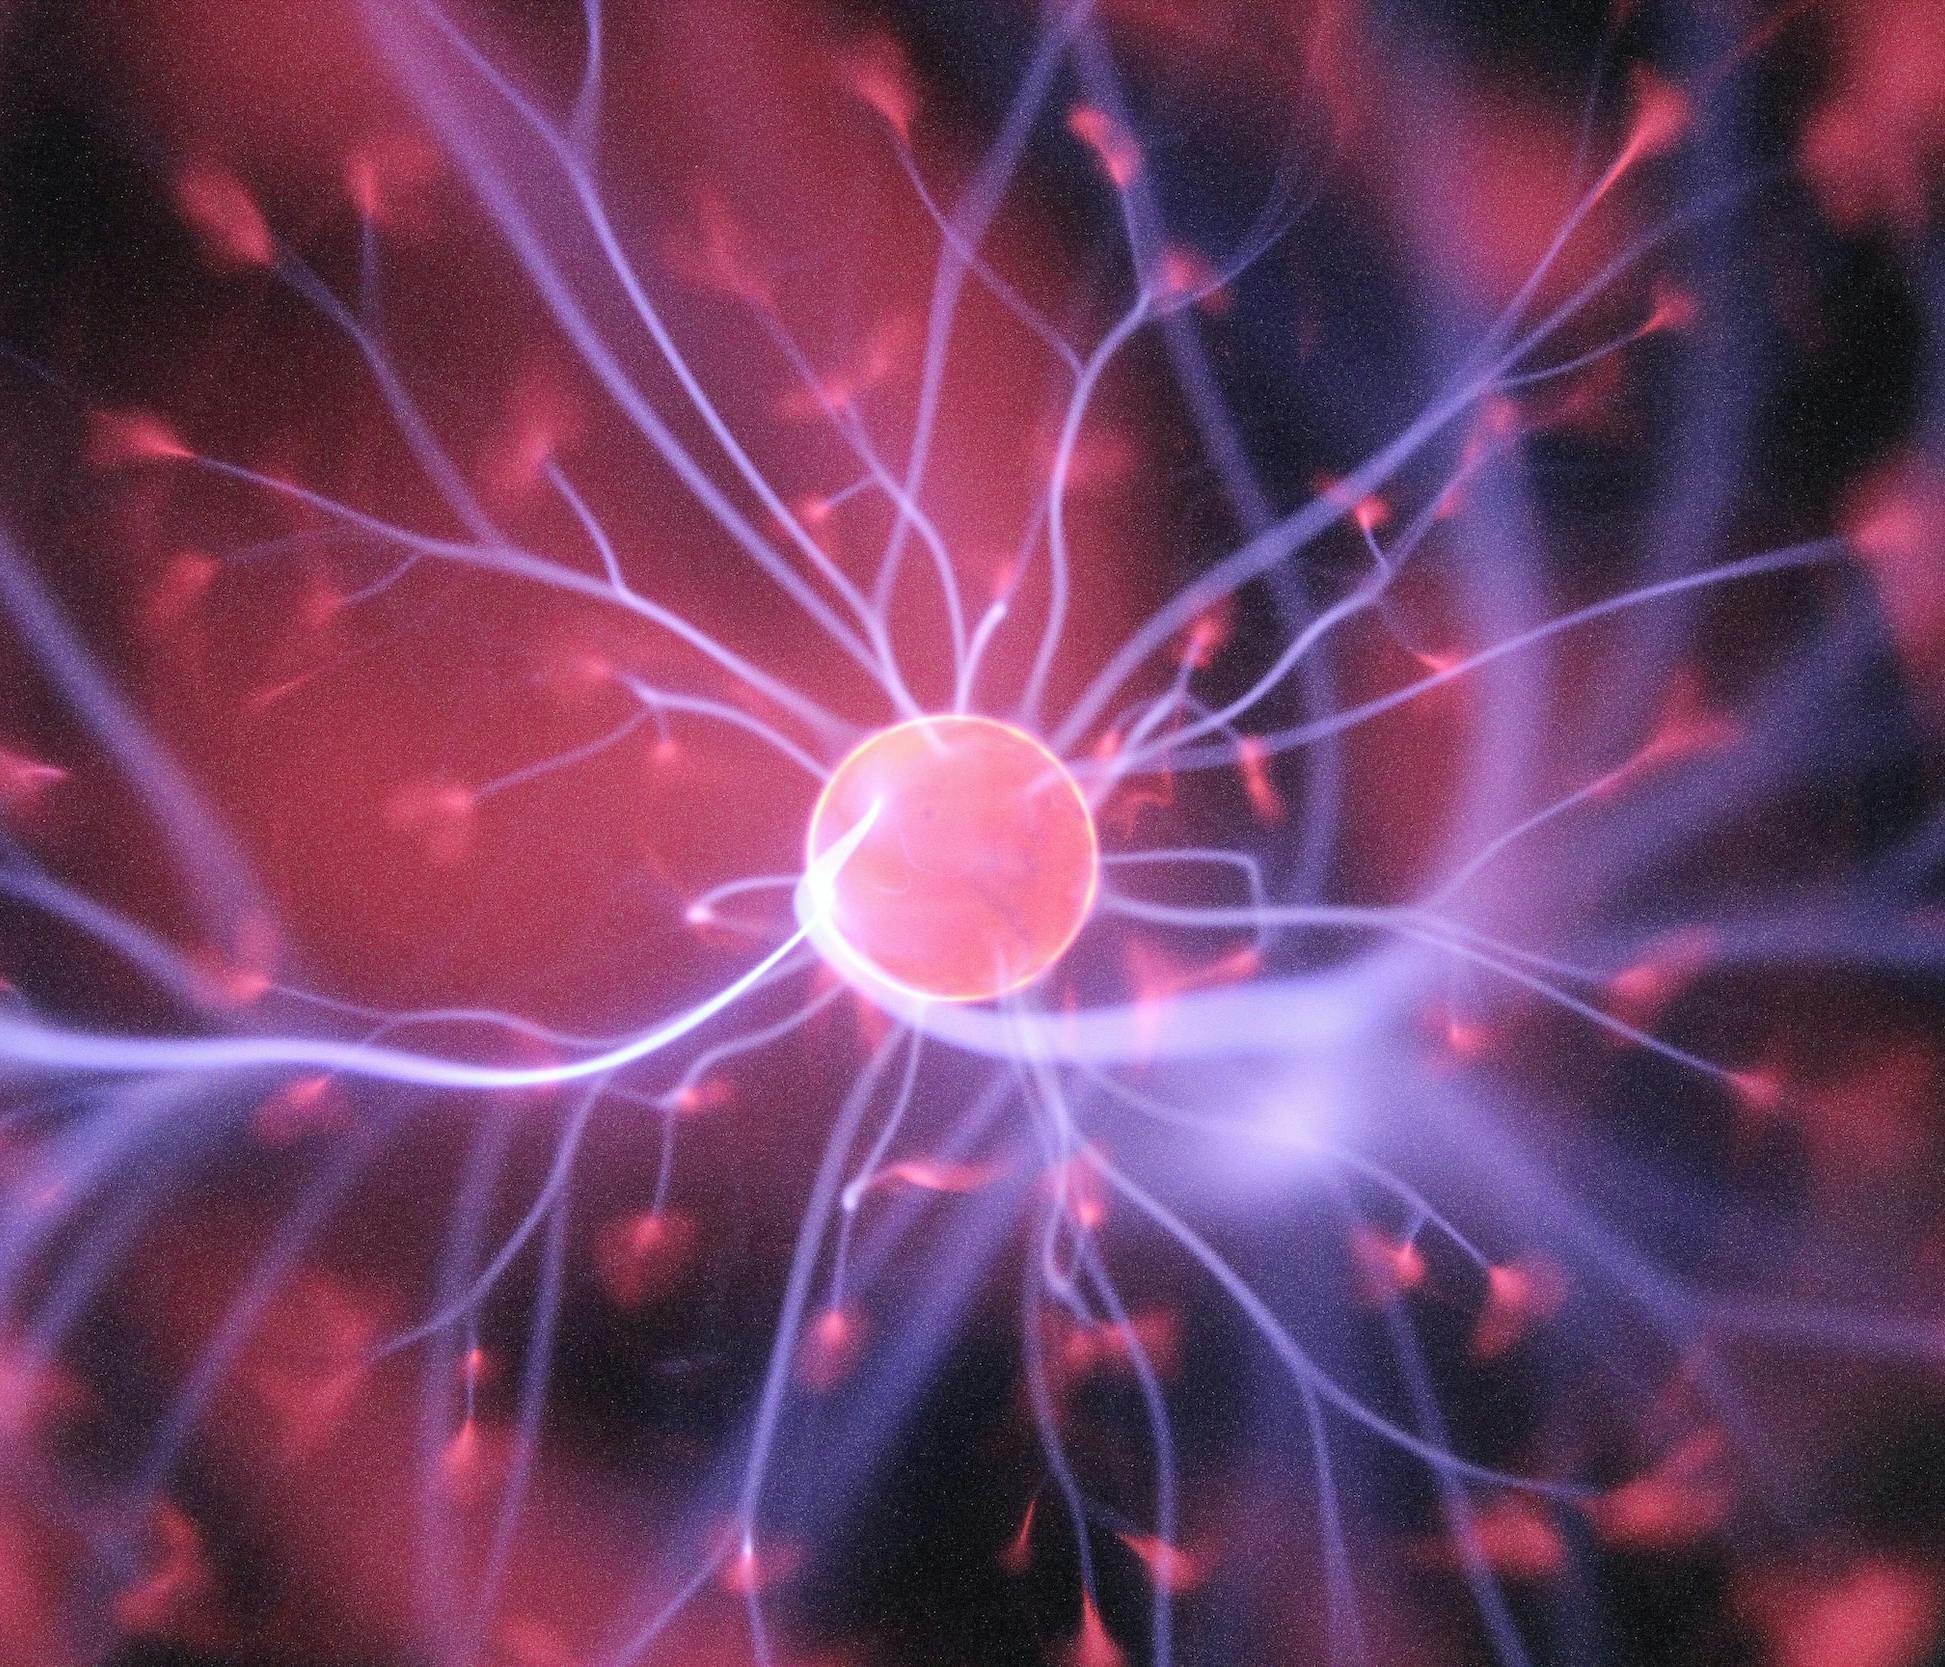 Graphic representation of a neuronal cell with its connections branching off from the nucleus.